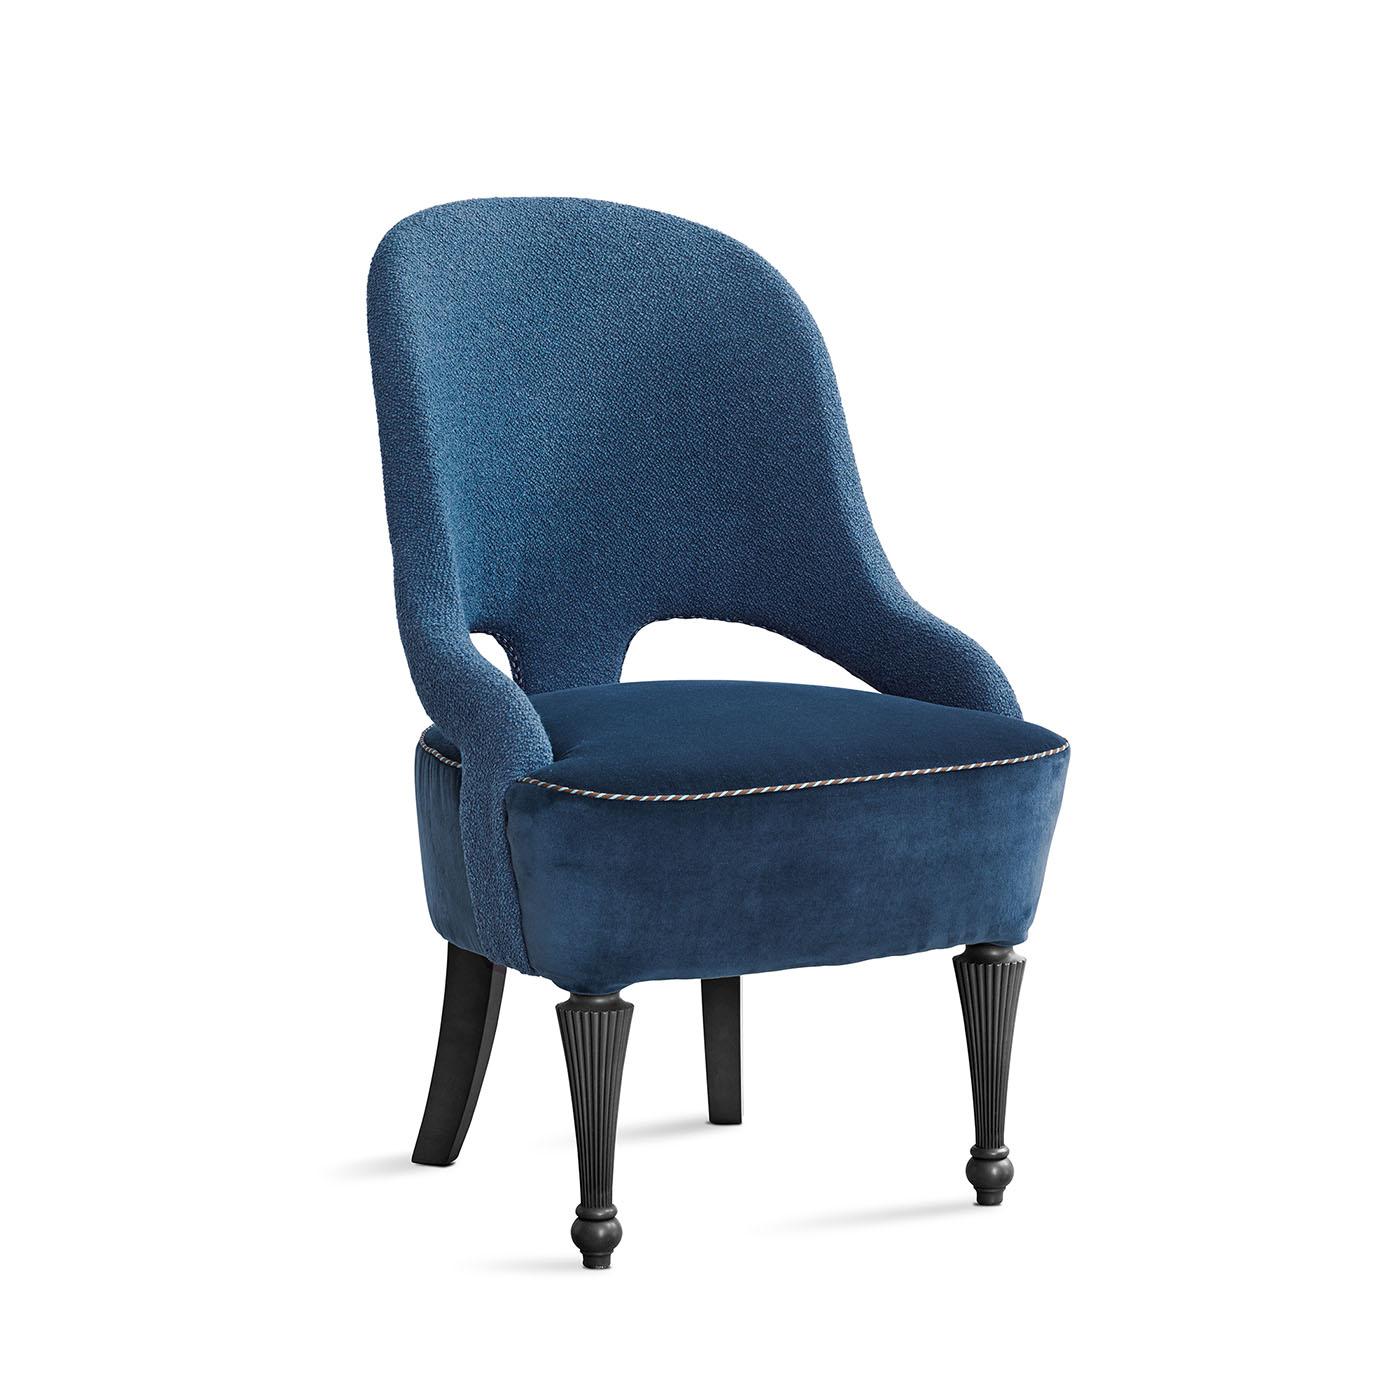 This chair showcases a harmonious combination of textures, featuring a bouclè backrest, a velvet seat, and elegantly embellished piping, all supported by beautifully turned wooden legs.